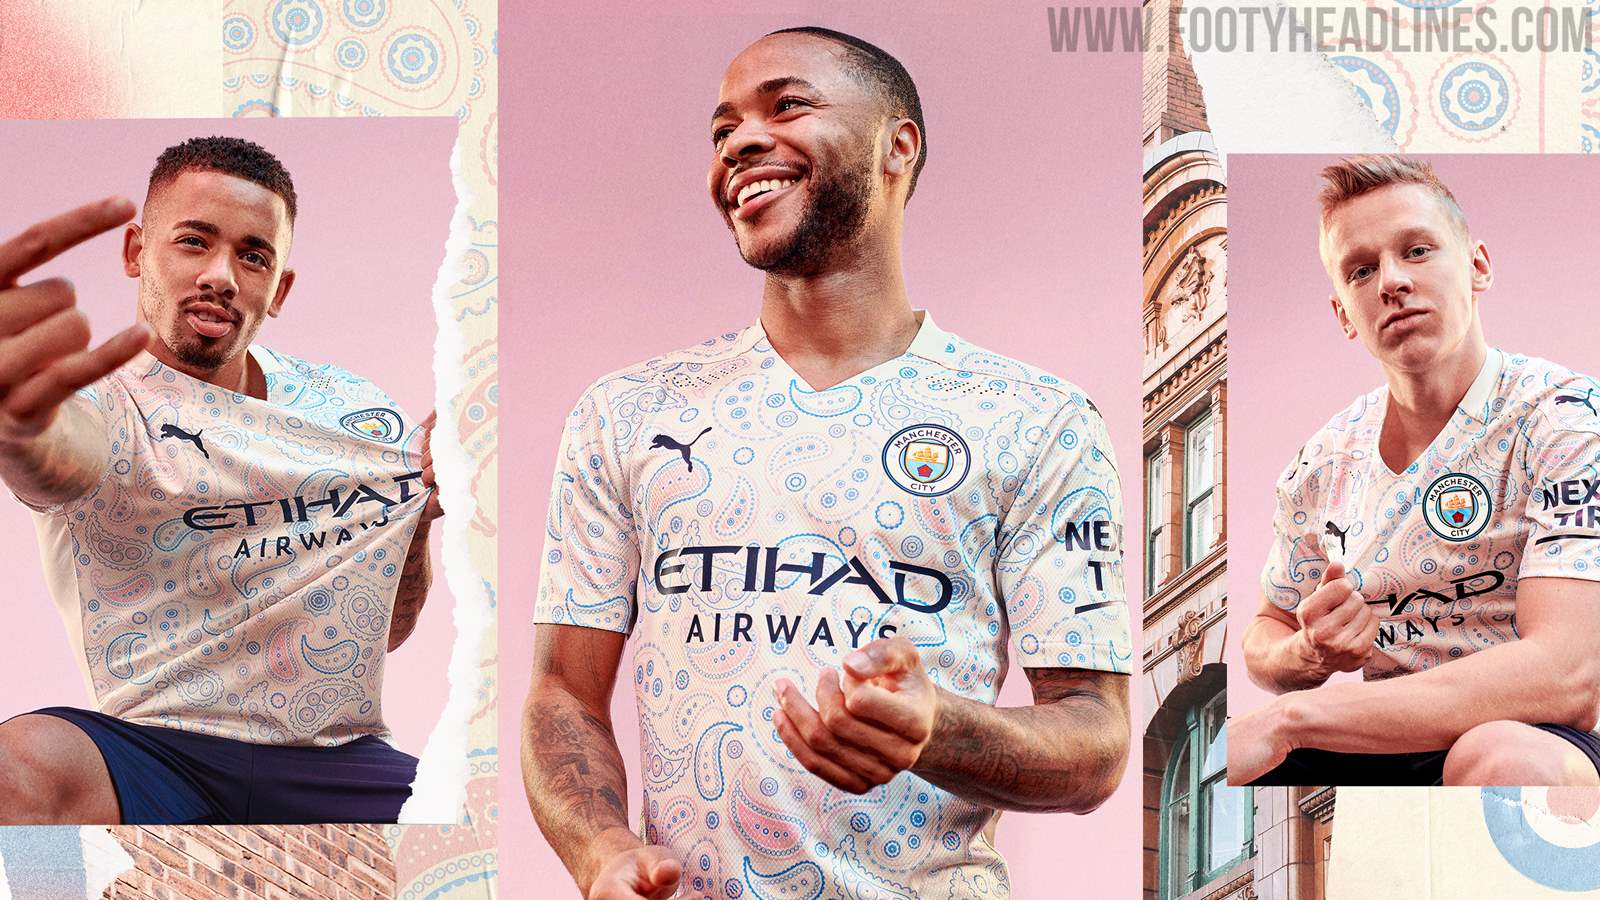 Manchester United 20-21 Third Kit Released - Footy Headlines